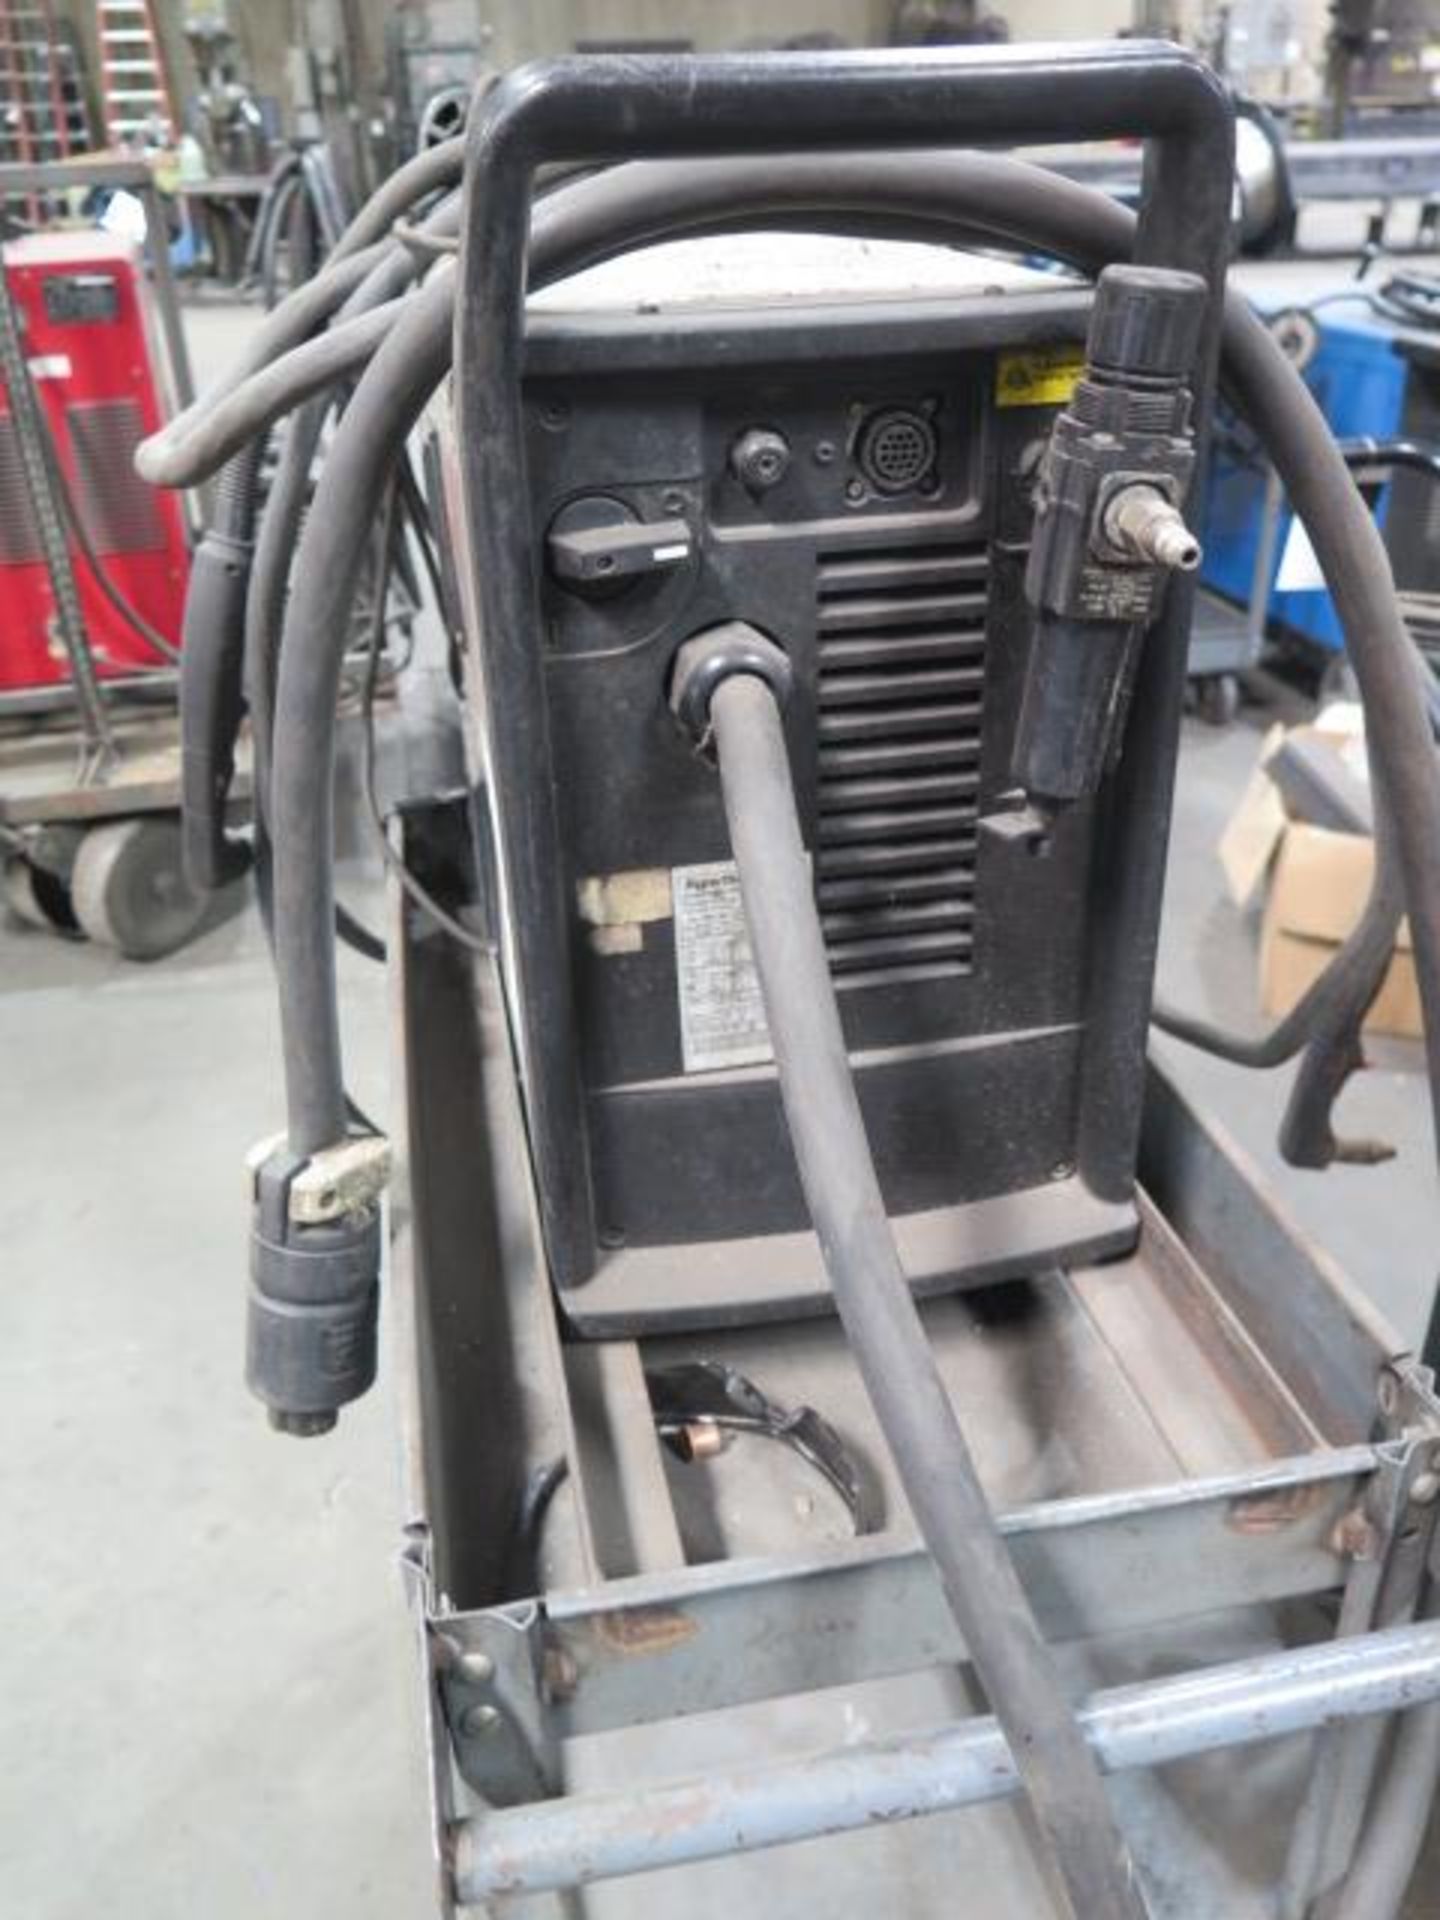 Hypertherm PowerMax 1000 Plasma Cutting Power Source w/ Cart (SOLD AS-IS - NO WARRANTY) - Image 5 of 6